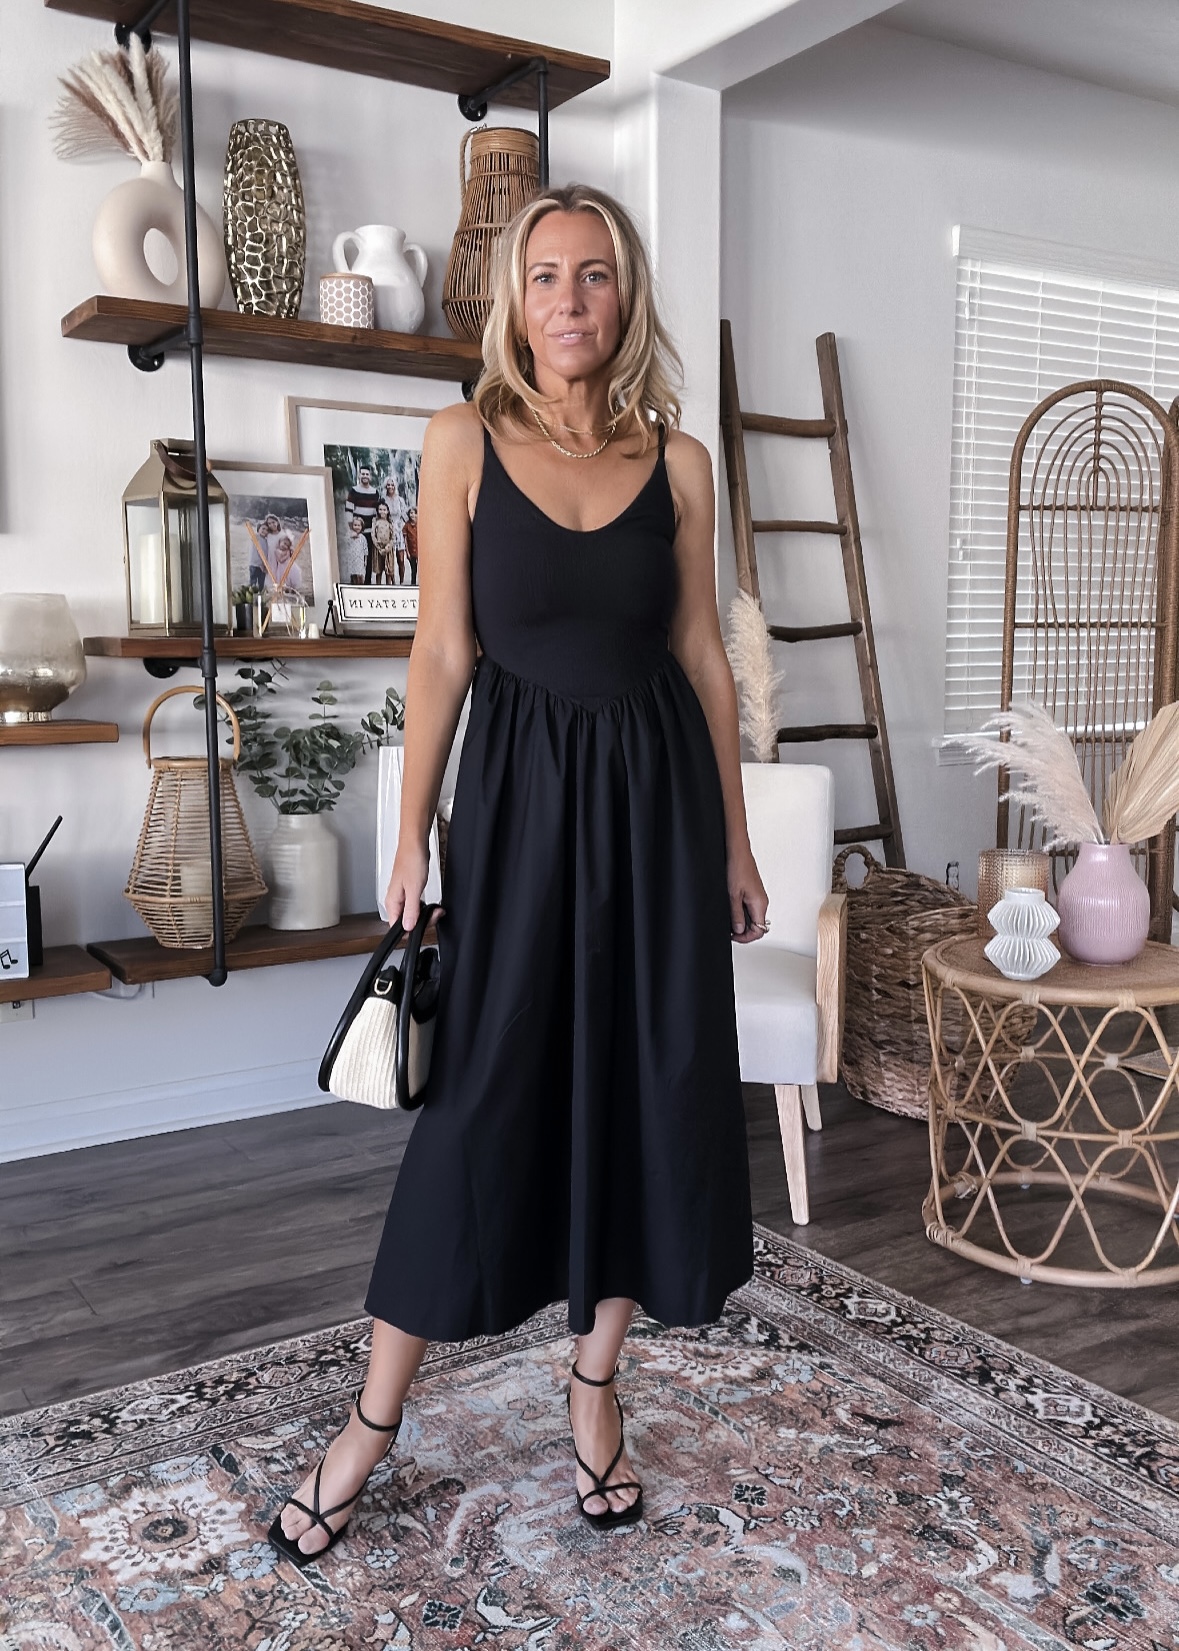 Summer Wedding Guest Dresses-Jaclyn De Leon style. If you’re heading to a wedding or an event this Summer I’ve got the perfect dress options for you.